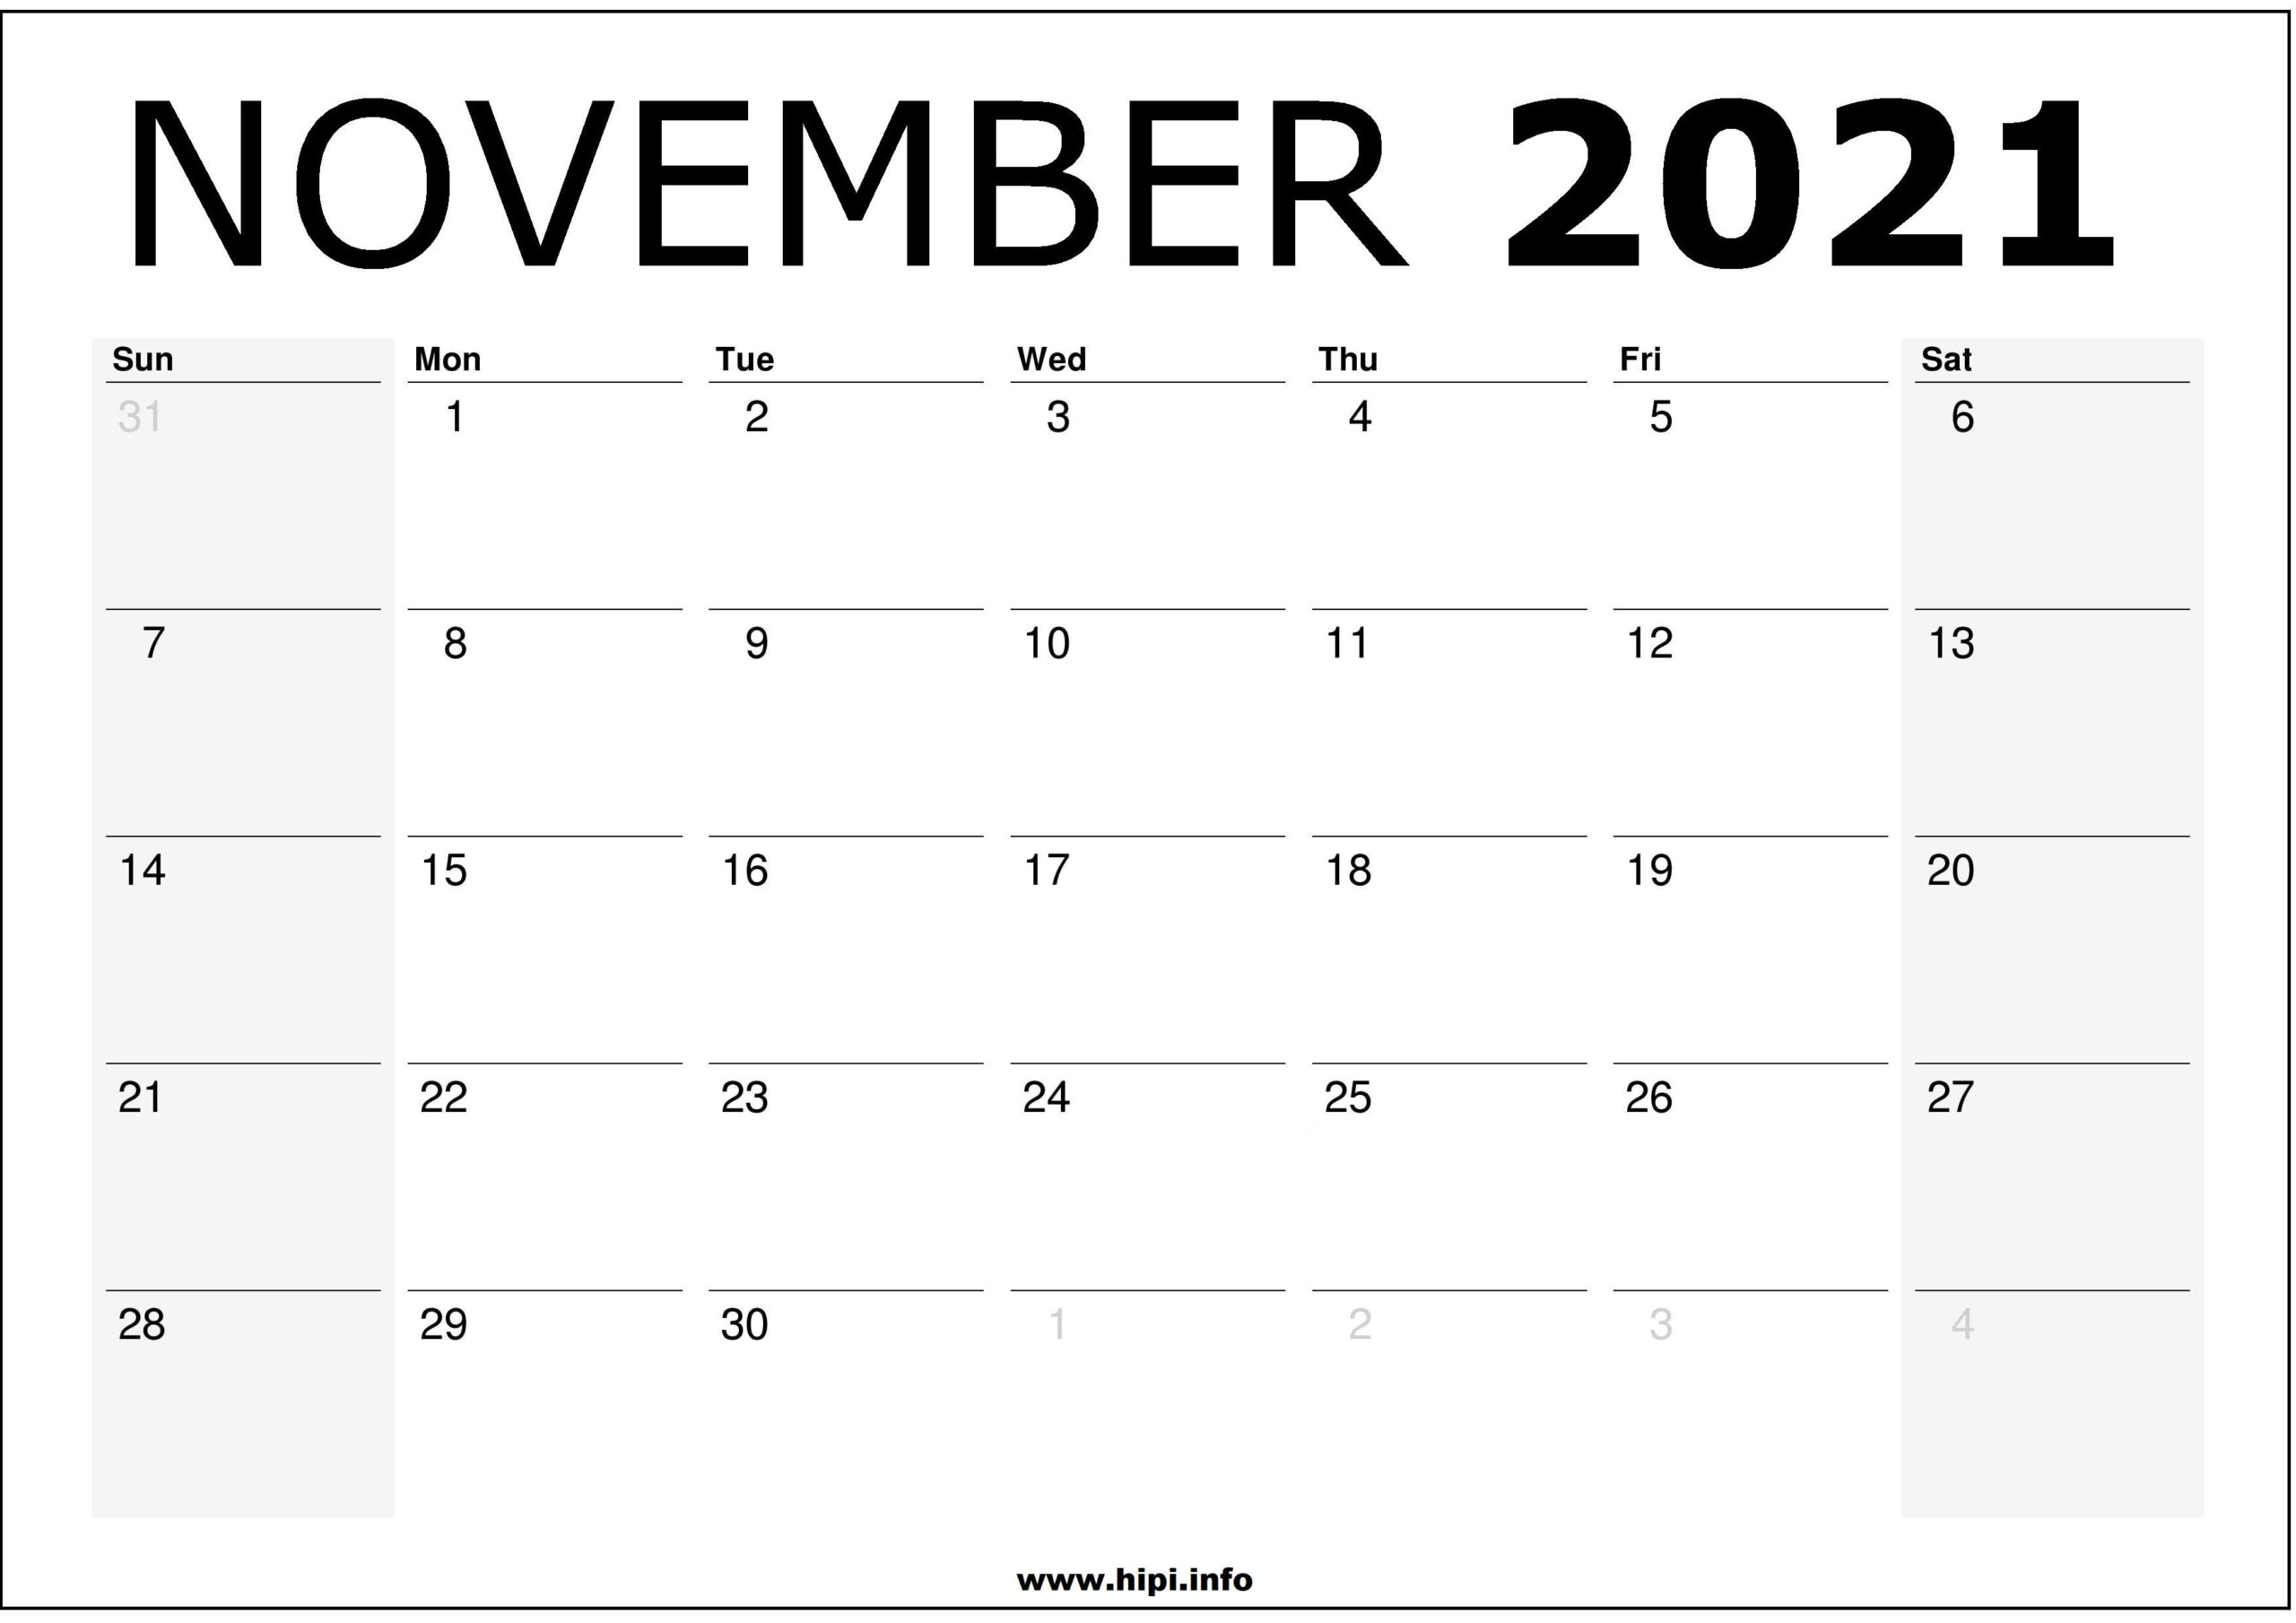 November 2021 Calendar Wallpapers  Wallpaper Cave throughout Free Printable Calendar 2021 3 Month Per Page